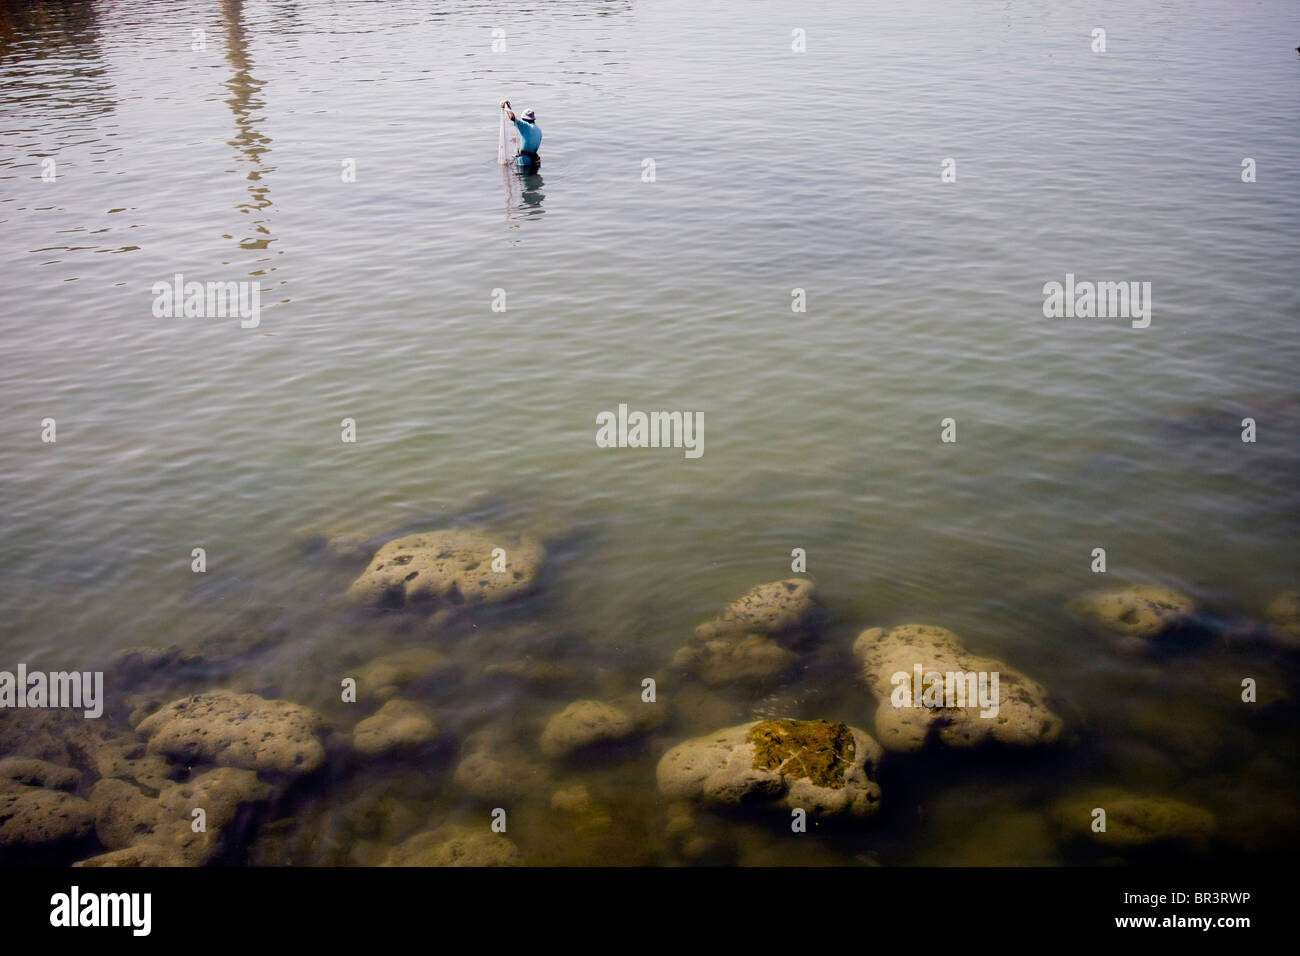 A man is dishing with a net in the old harbor of the historical town of Sidon (Saida) in southern Lebanon. Stock Photo